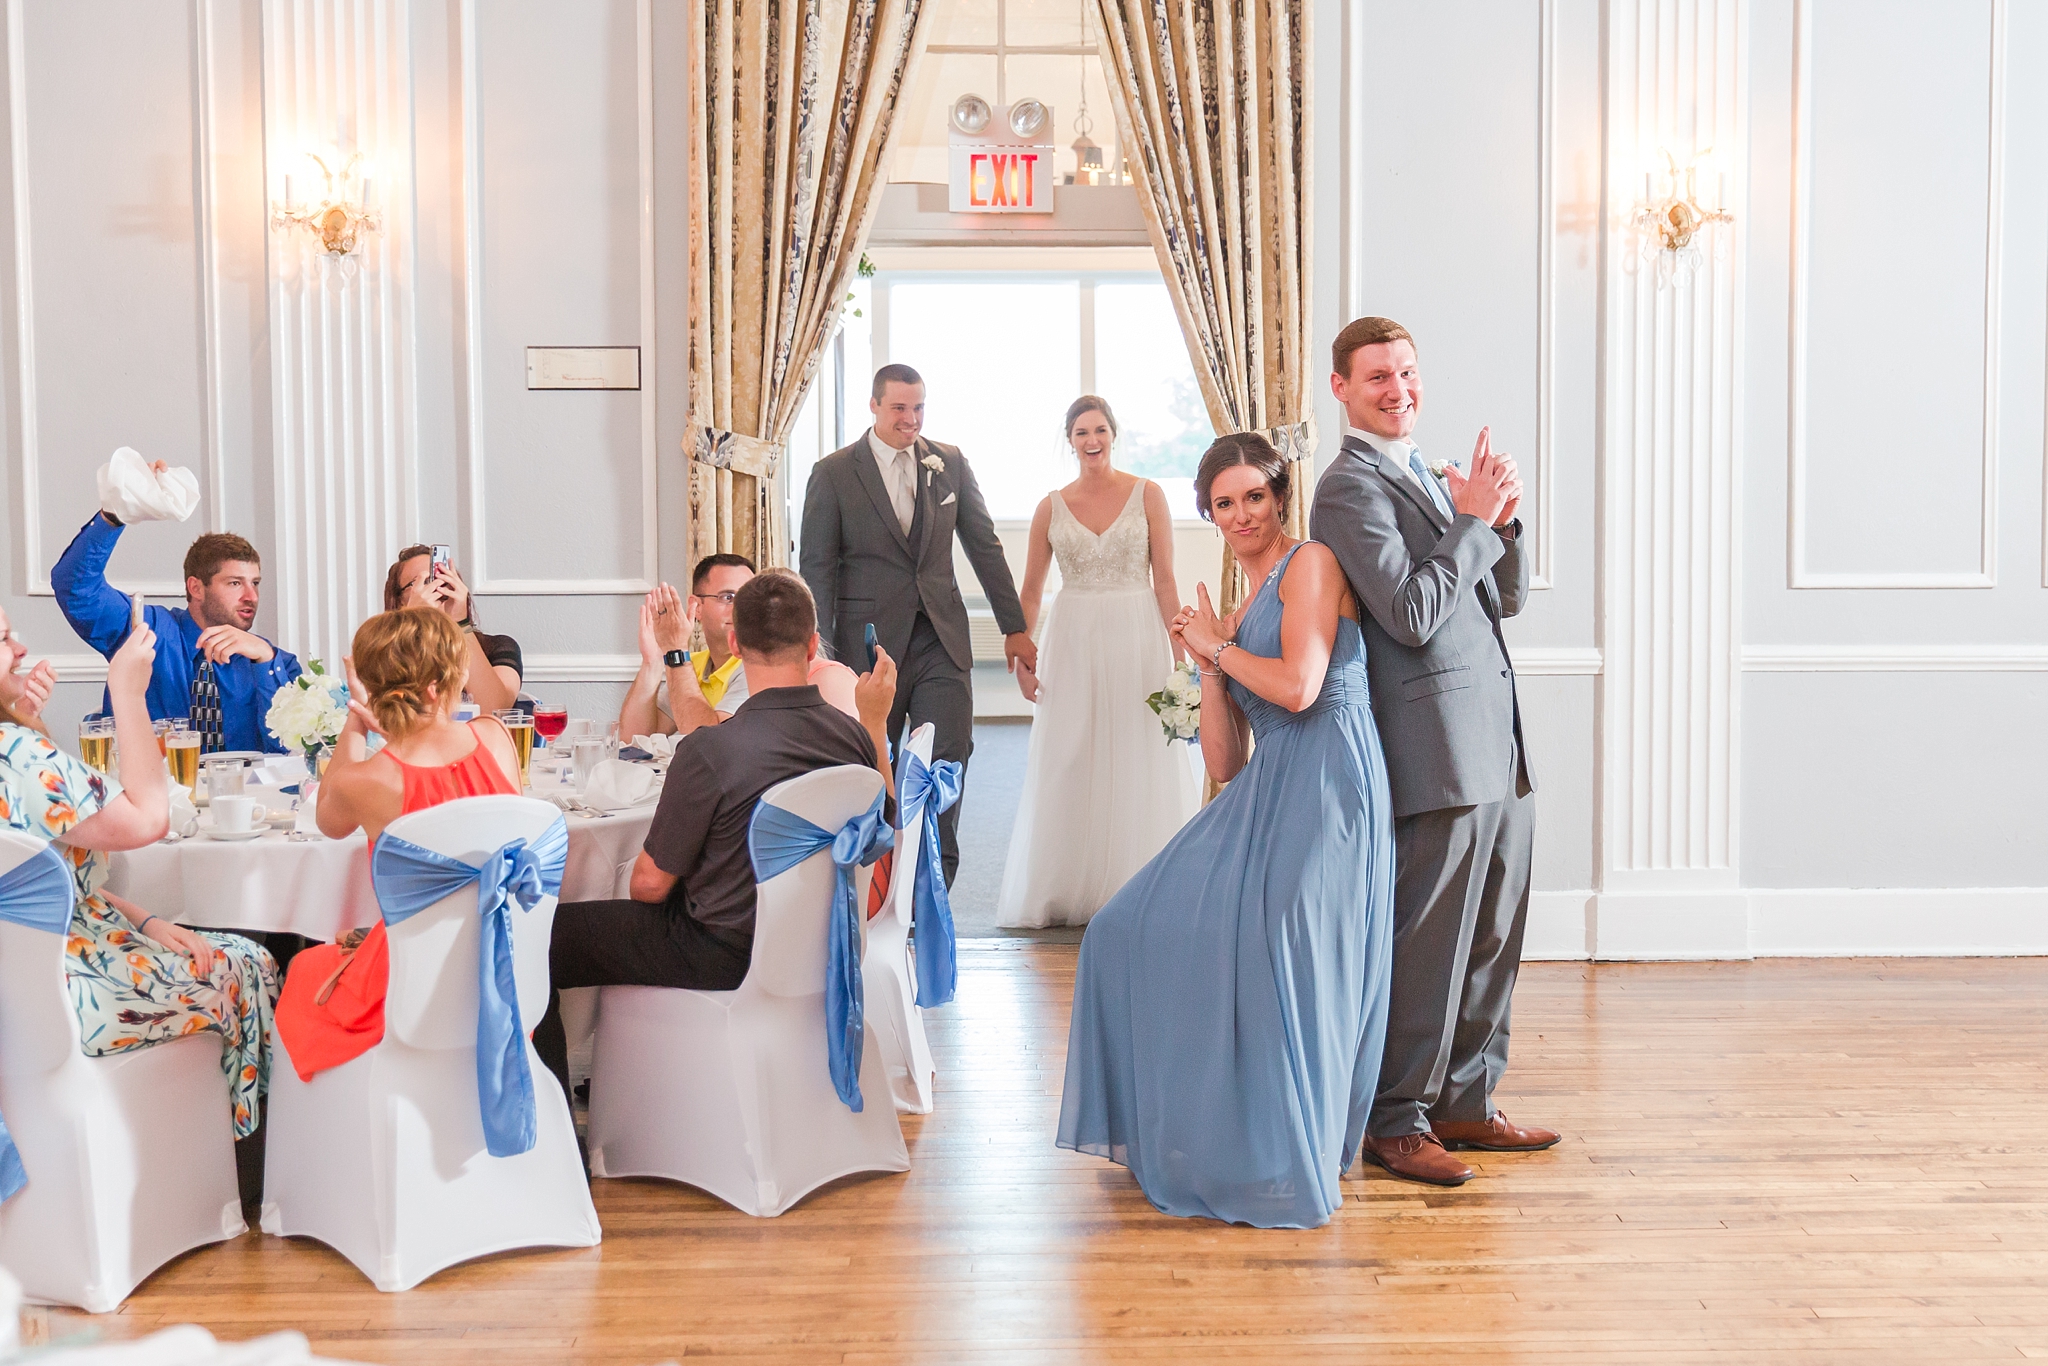 classic-intimate-fun-wedding-photos-at-the-meeting-house-grand-ballroom-in-plymouth-michigan-by-courtney-carolyn-photography_0073.jpg